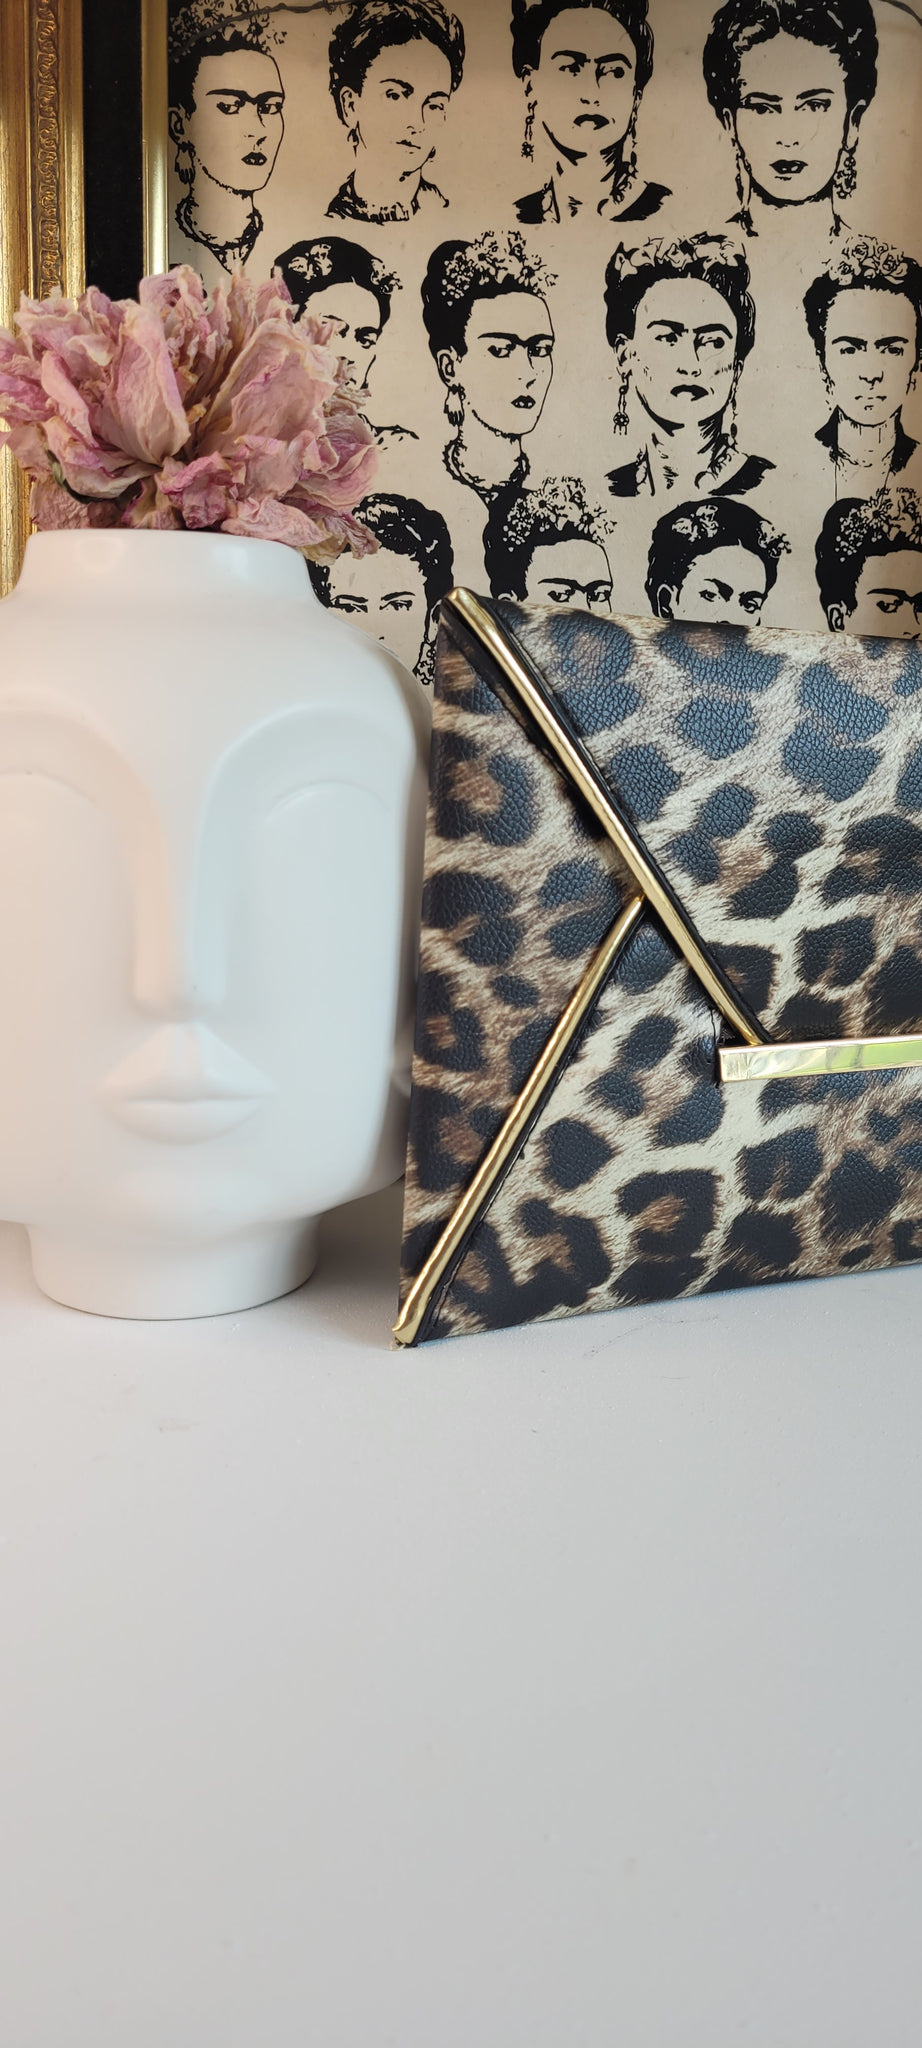 Into the Wild Leopard Clutch